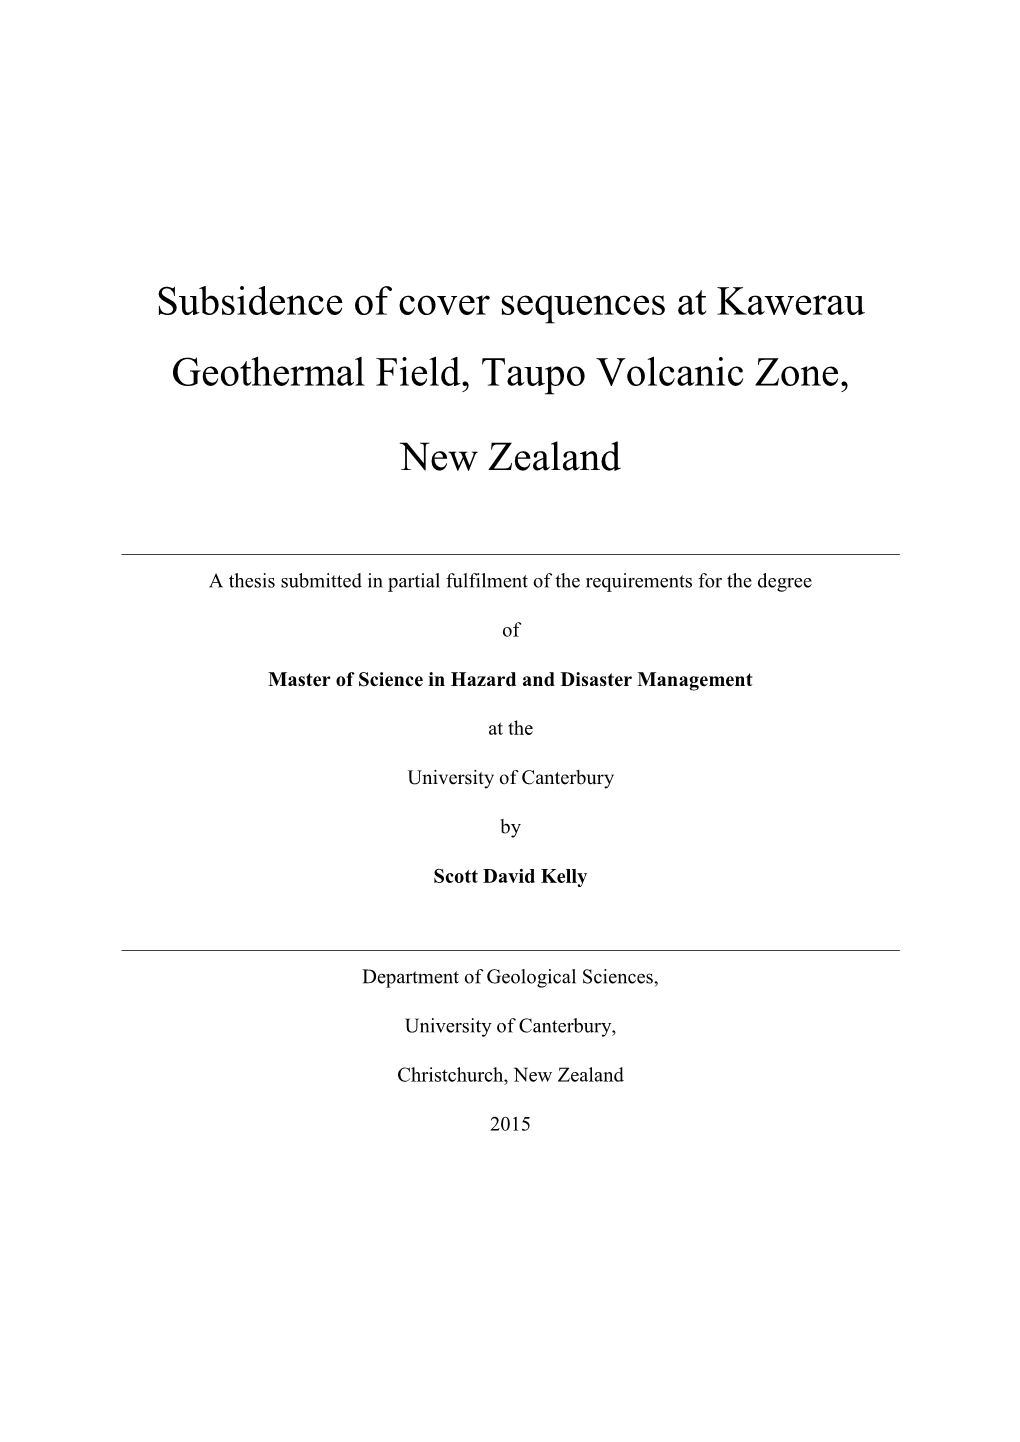 Subsidence of Cover Sequences at Kawerau Geothermal Field, Taupo Volcanic Zone